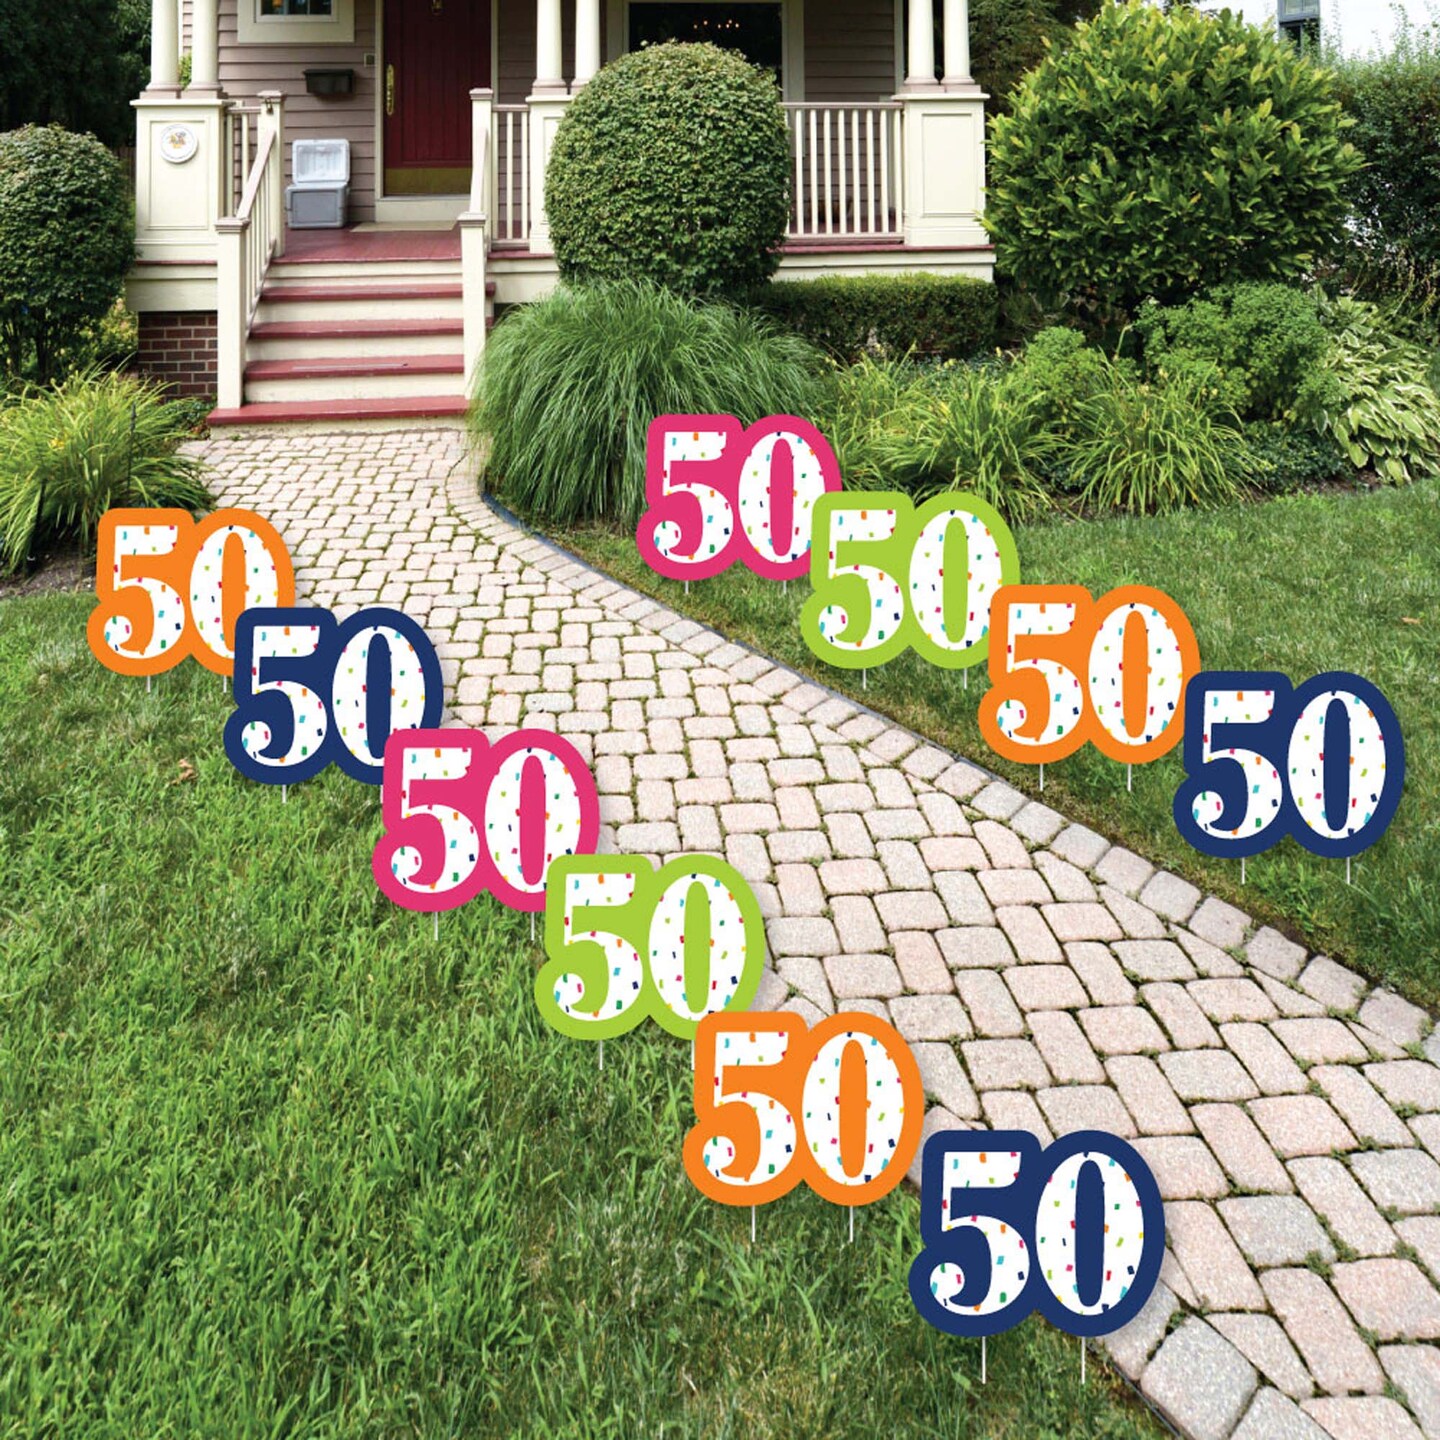 Big Dot of Happiness 50th Birthday - Cheerful Happy Birthday - Lawn Decorations - Outdoor Colorful Fiftieth Birthday Party Yard Decorations - 10 Piece